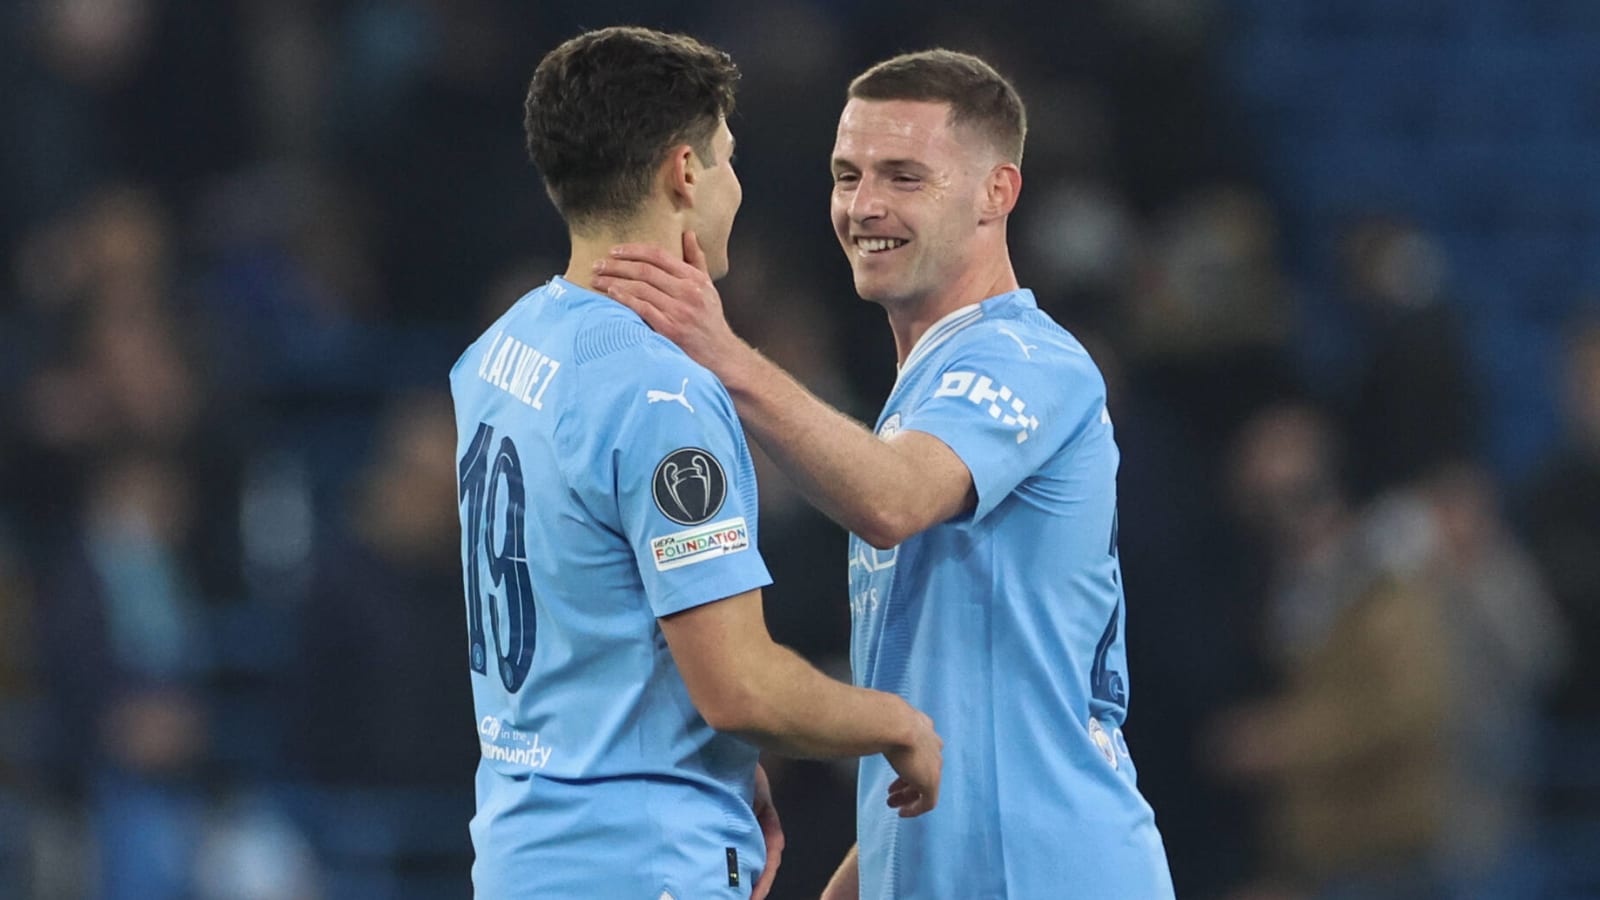 Manchester City 3 FC Copenhagen 1: City player ratings as City cruise through at the Etihad